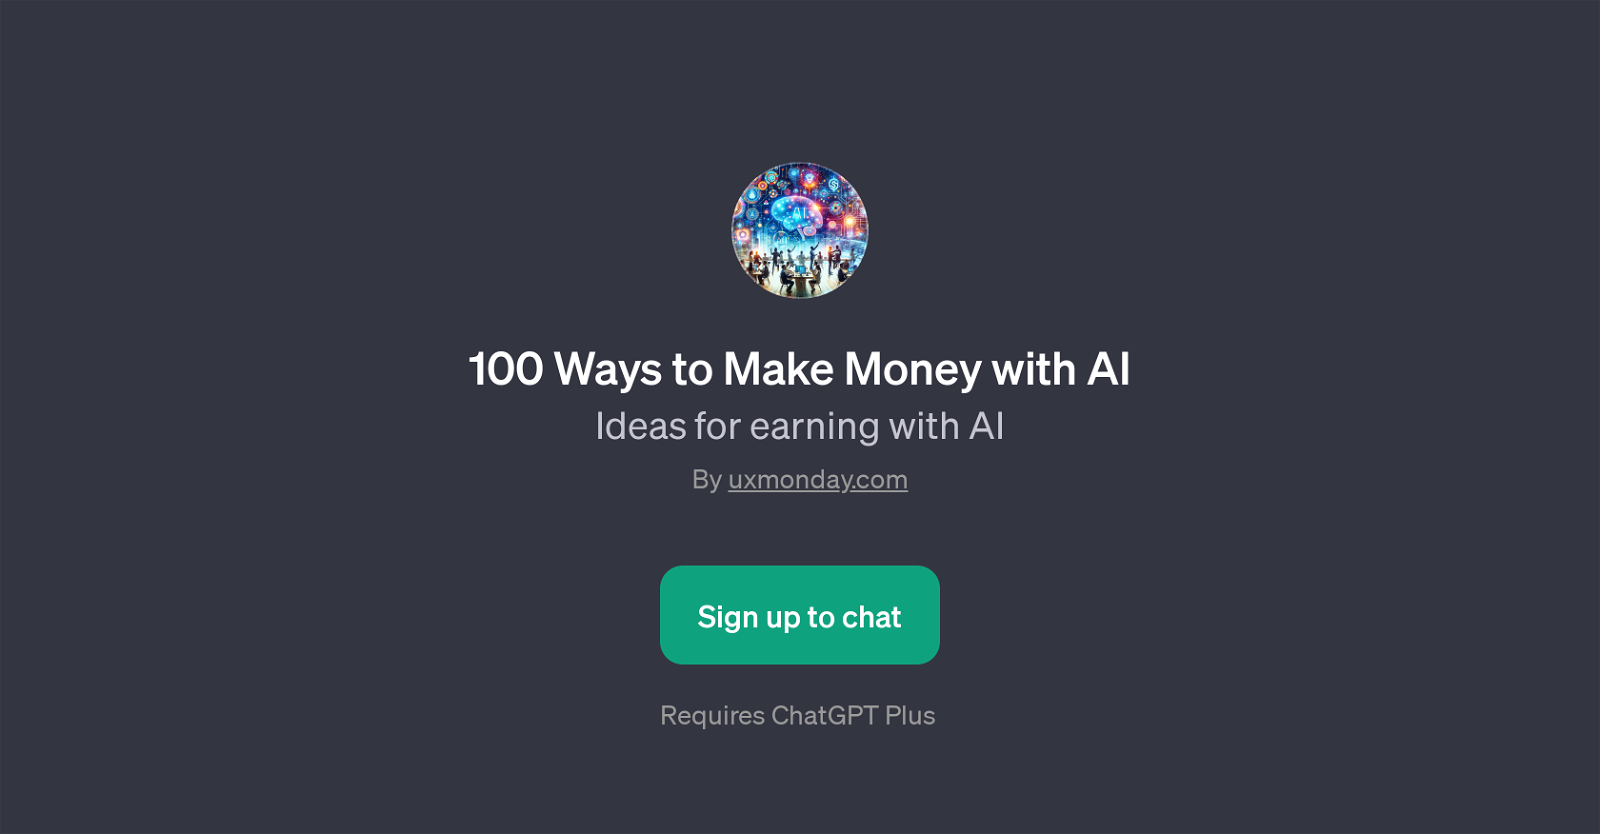 100 Ways to Make Money with AI website